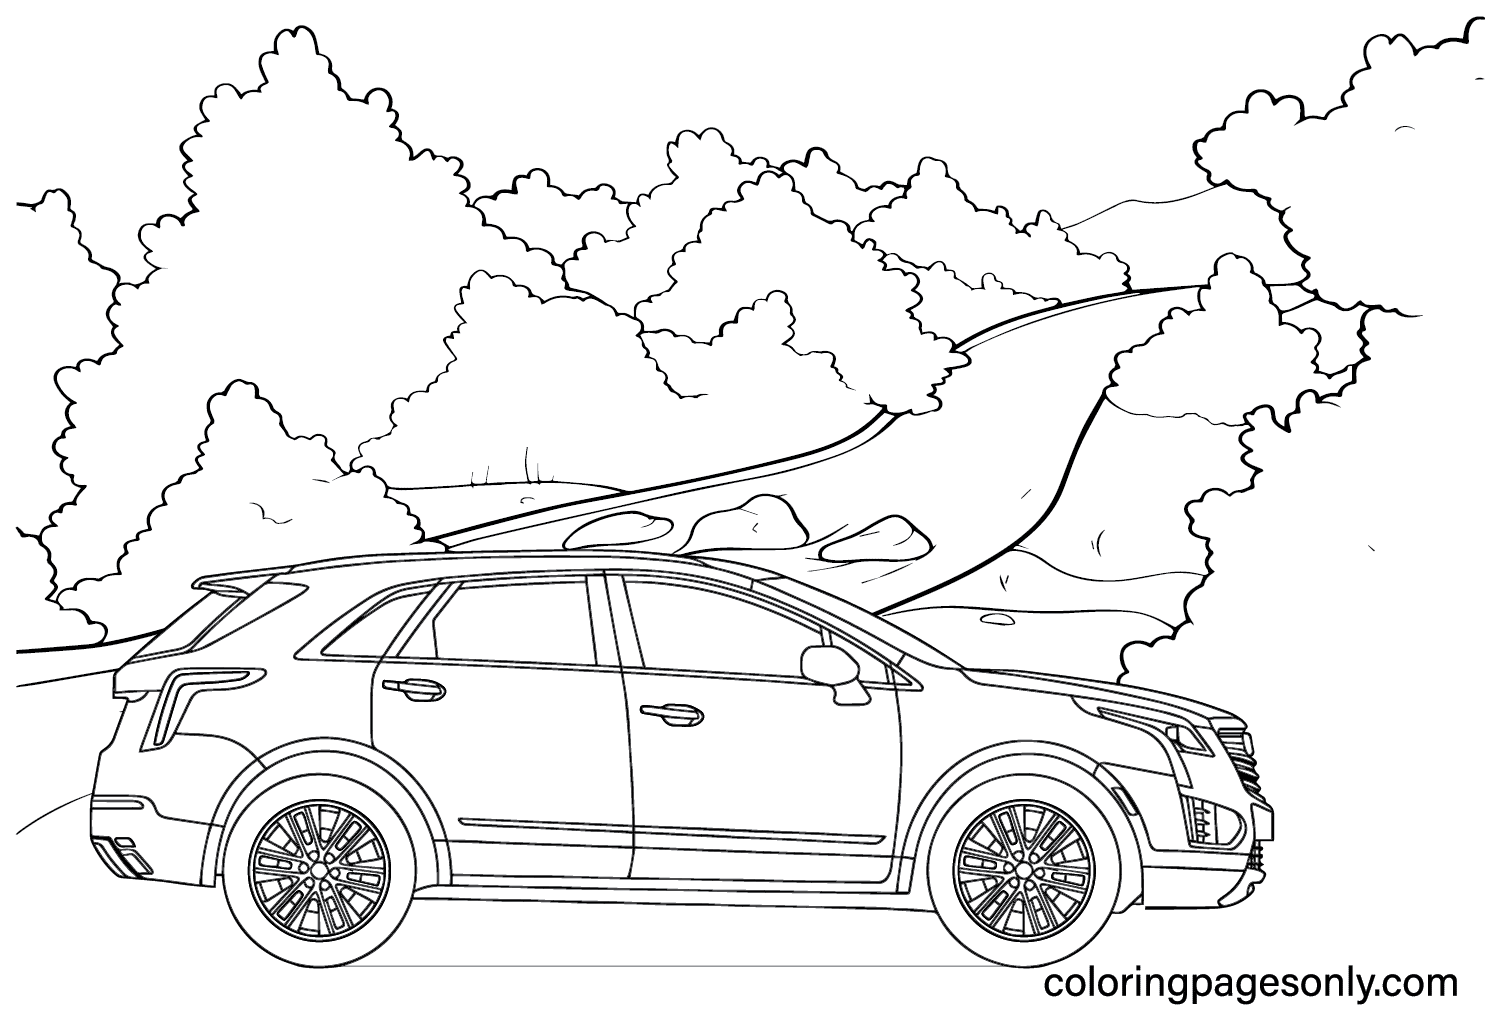 Cadillac XT5 Coloring Page - Free Printable Coloring Pages